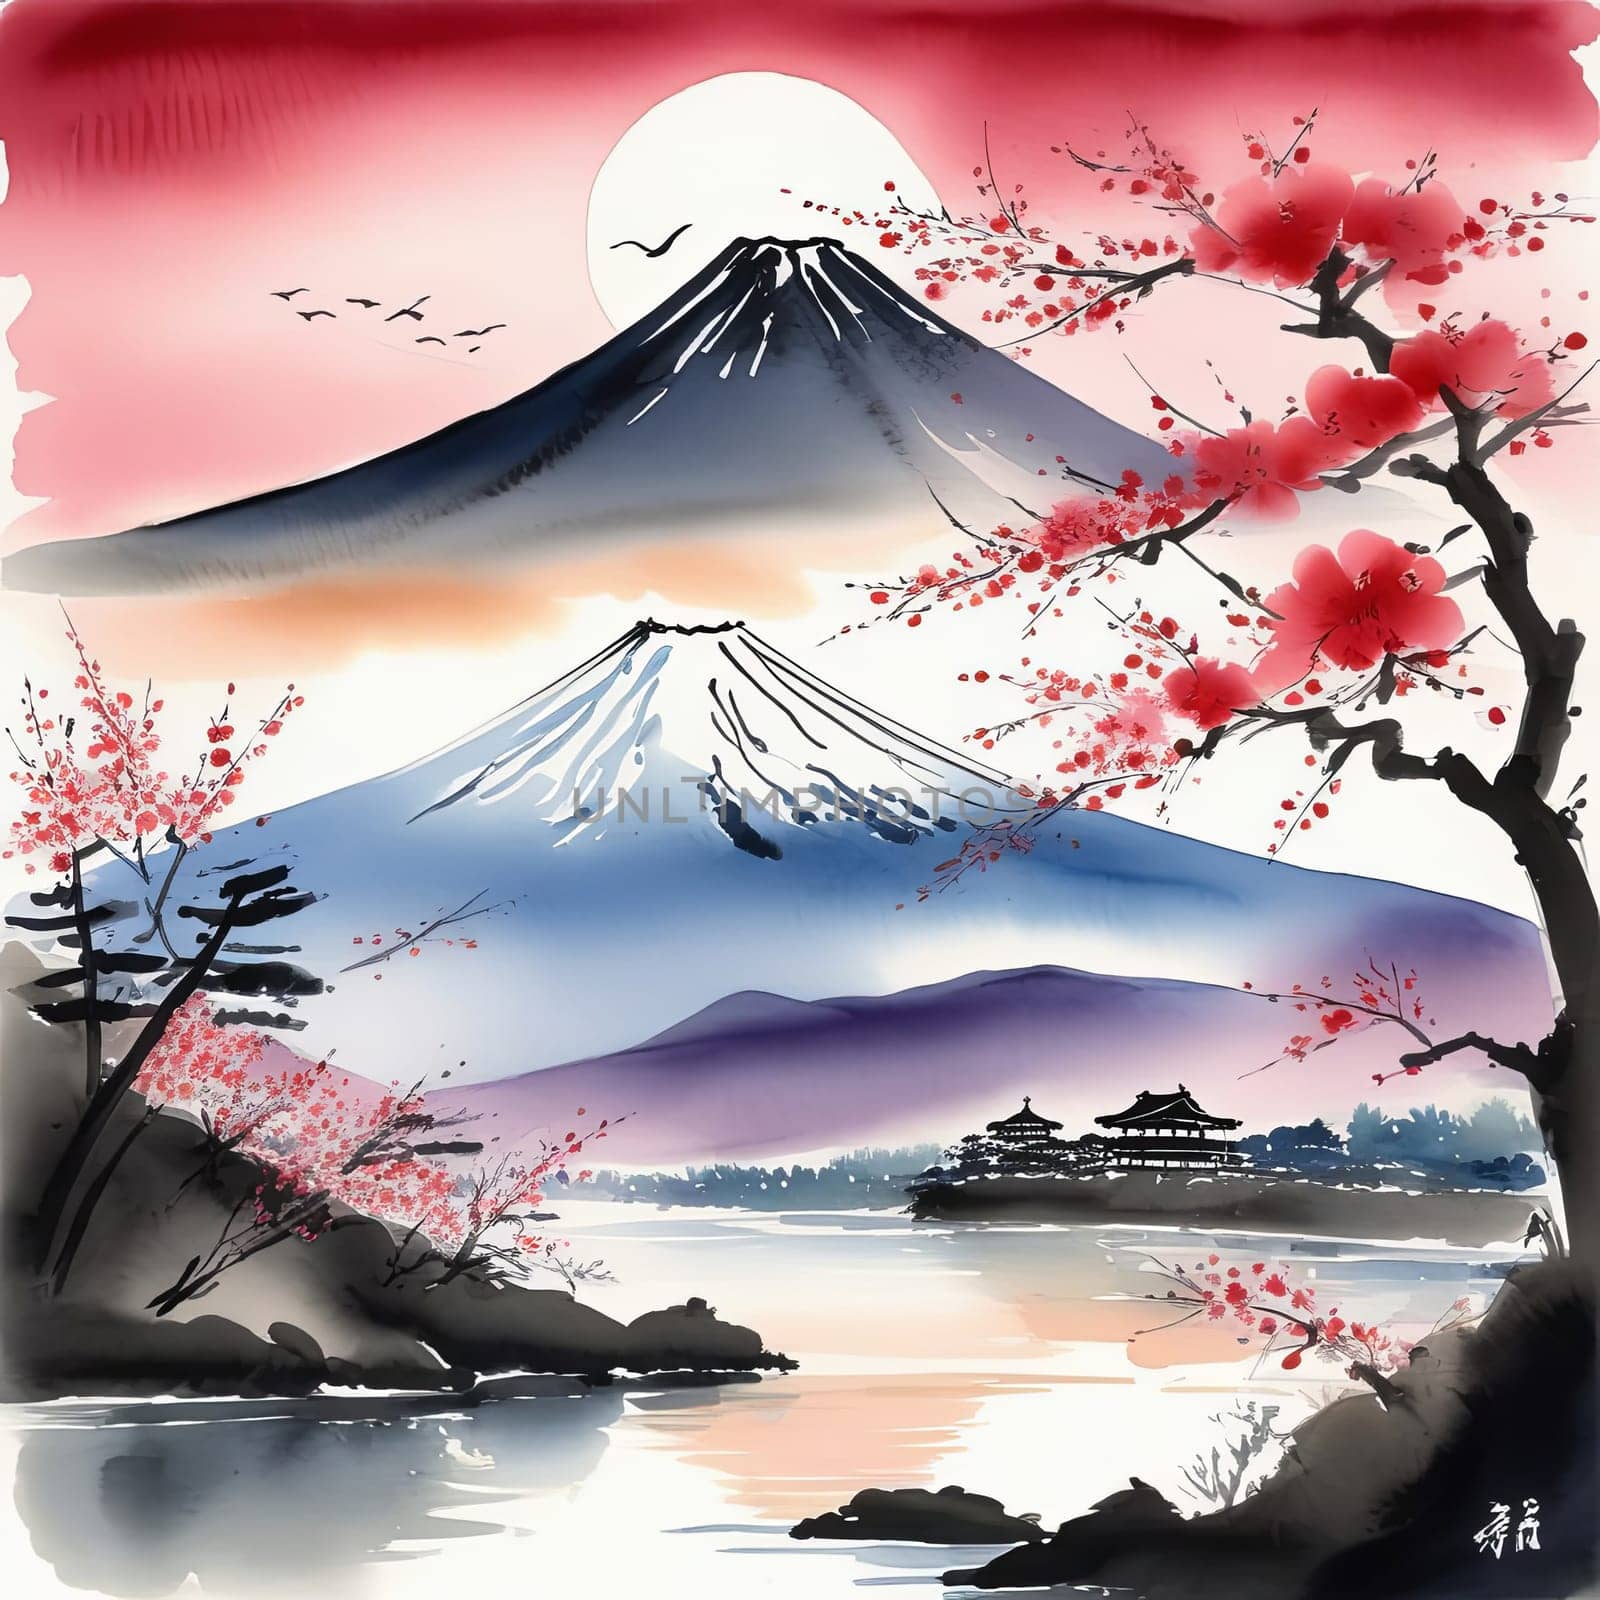 Mount Fuji majestically rising in background, framed by delicate cherry blossoms in full bloom, capturing essence of Japans natural beauty, cultural significance. For art, fashion, style, magazines. by Angelsmoon